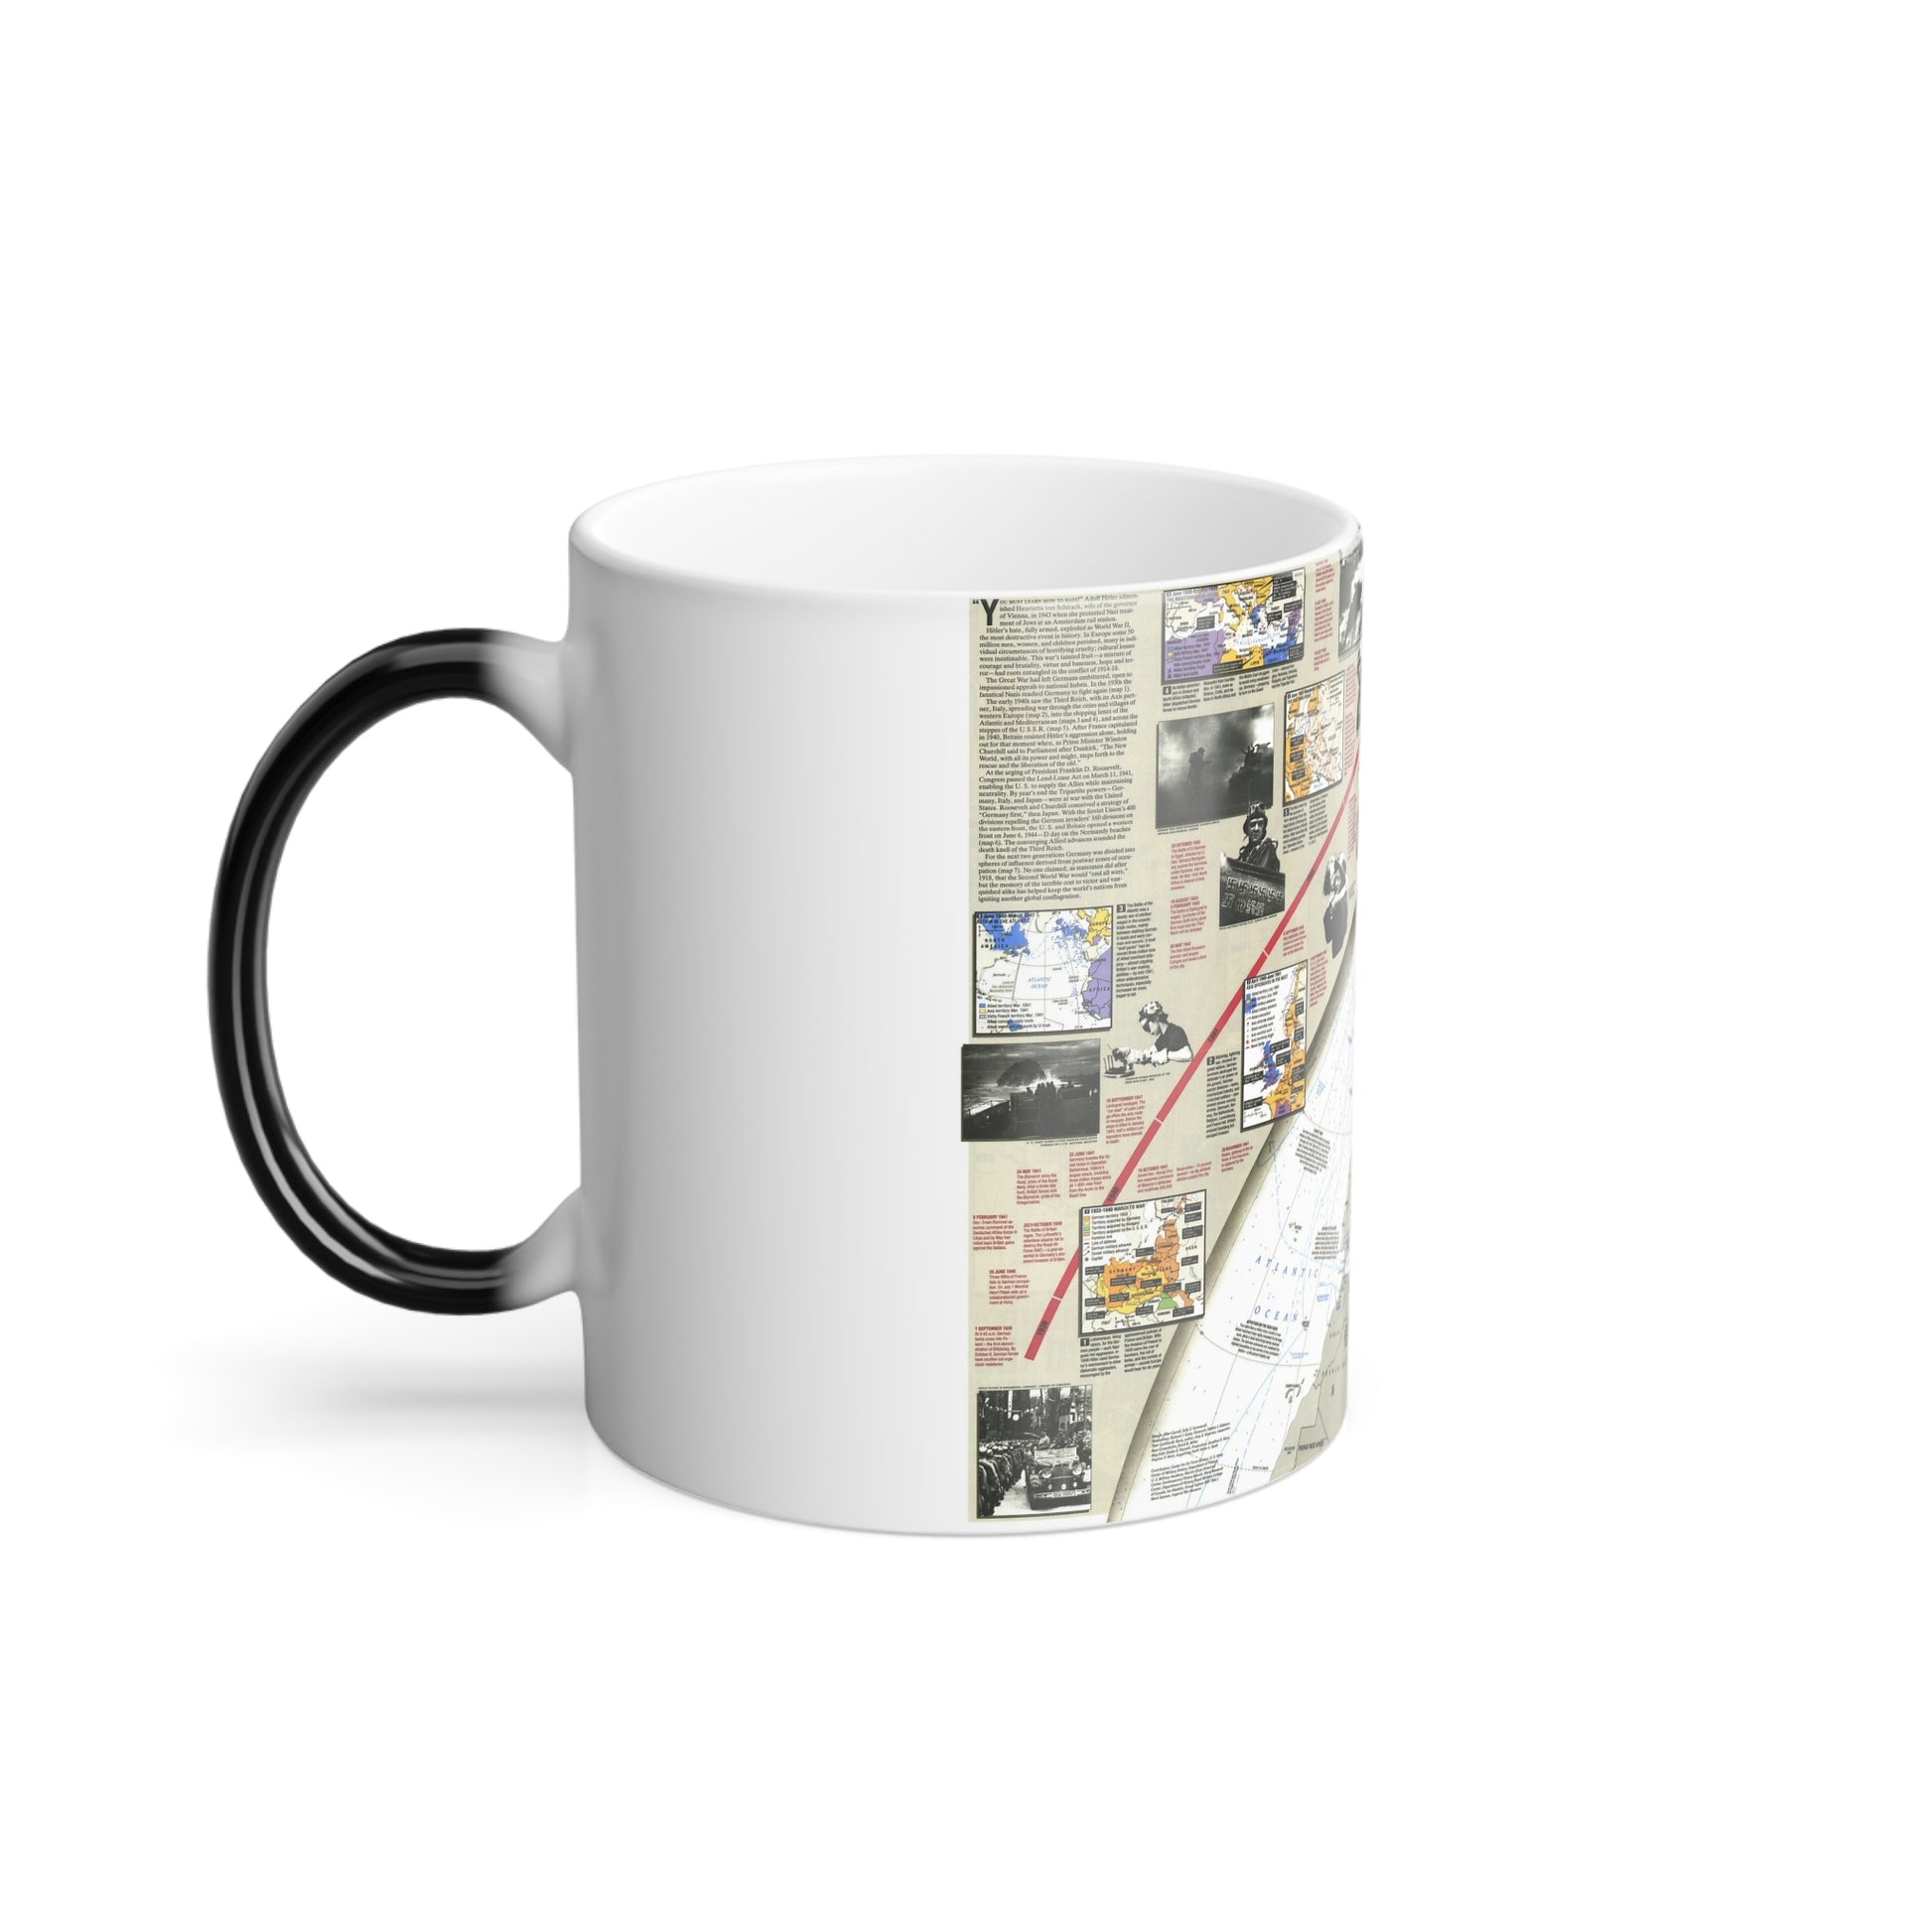 World War II- Europe and North Africa (1991) (Map) Color Changing Mug 11oz-11oz-The Sticker Space